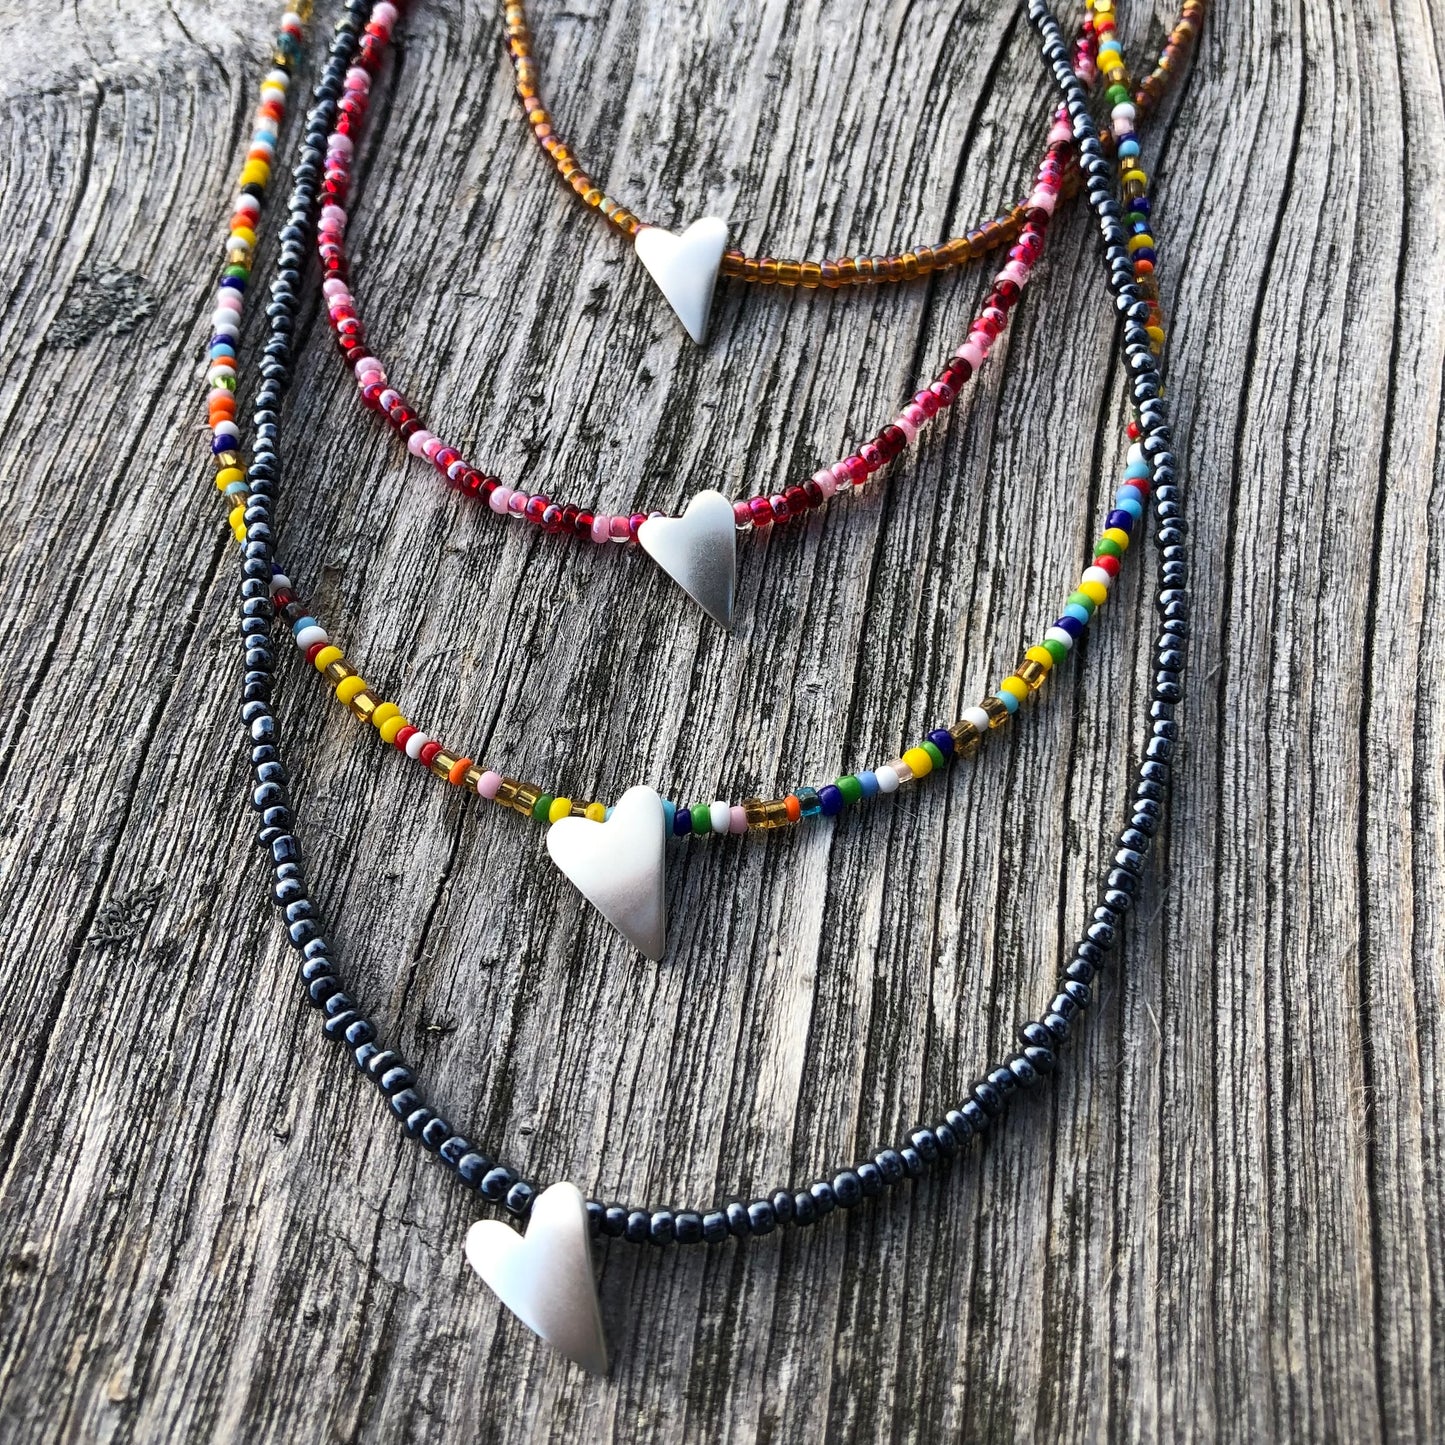 Rainbow Rootbeer Seed Bead Necklace With Sterling Silver Heart Pendant